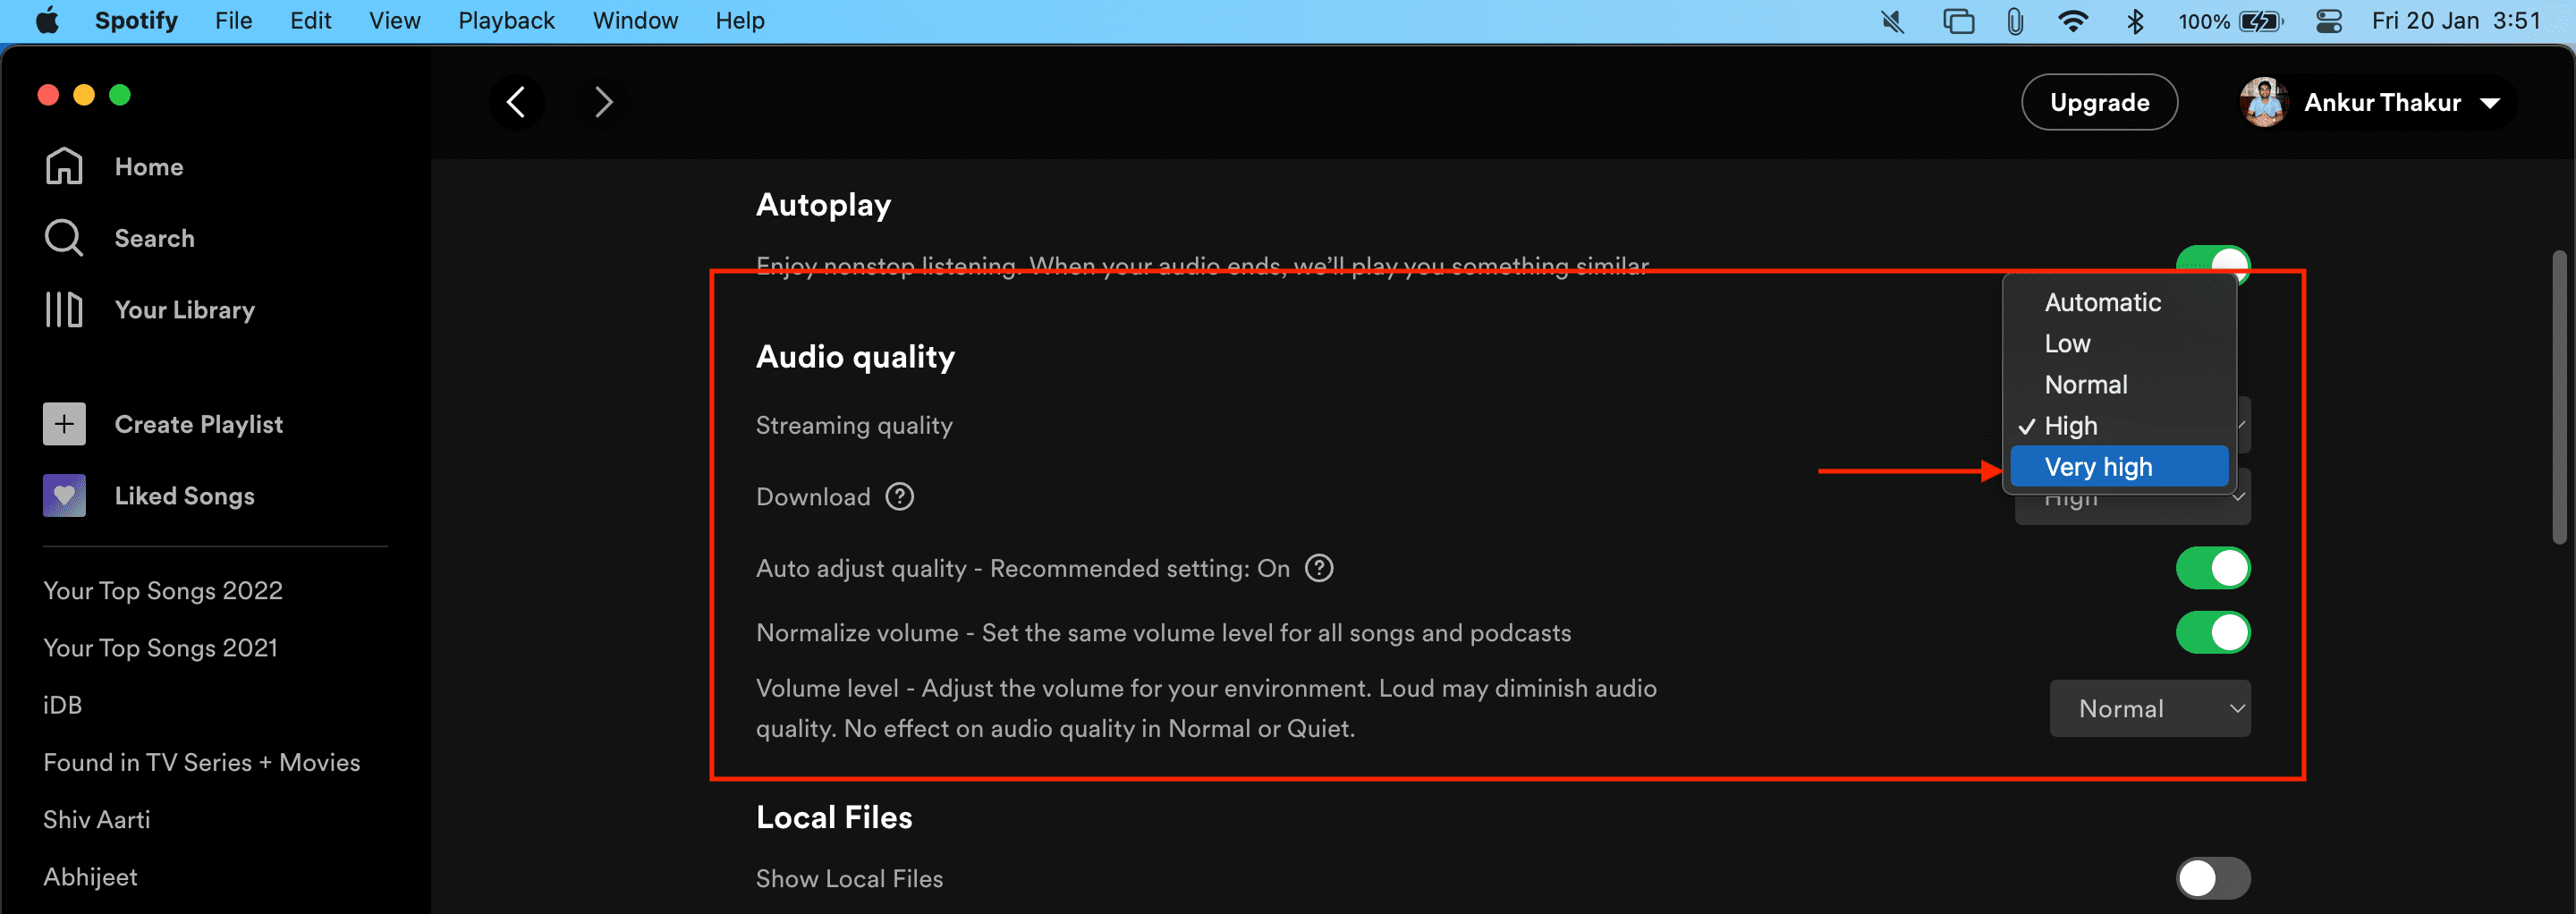 Select very high quality audio quality in Spotify on Mac